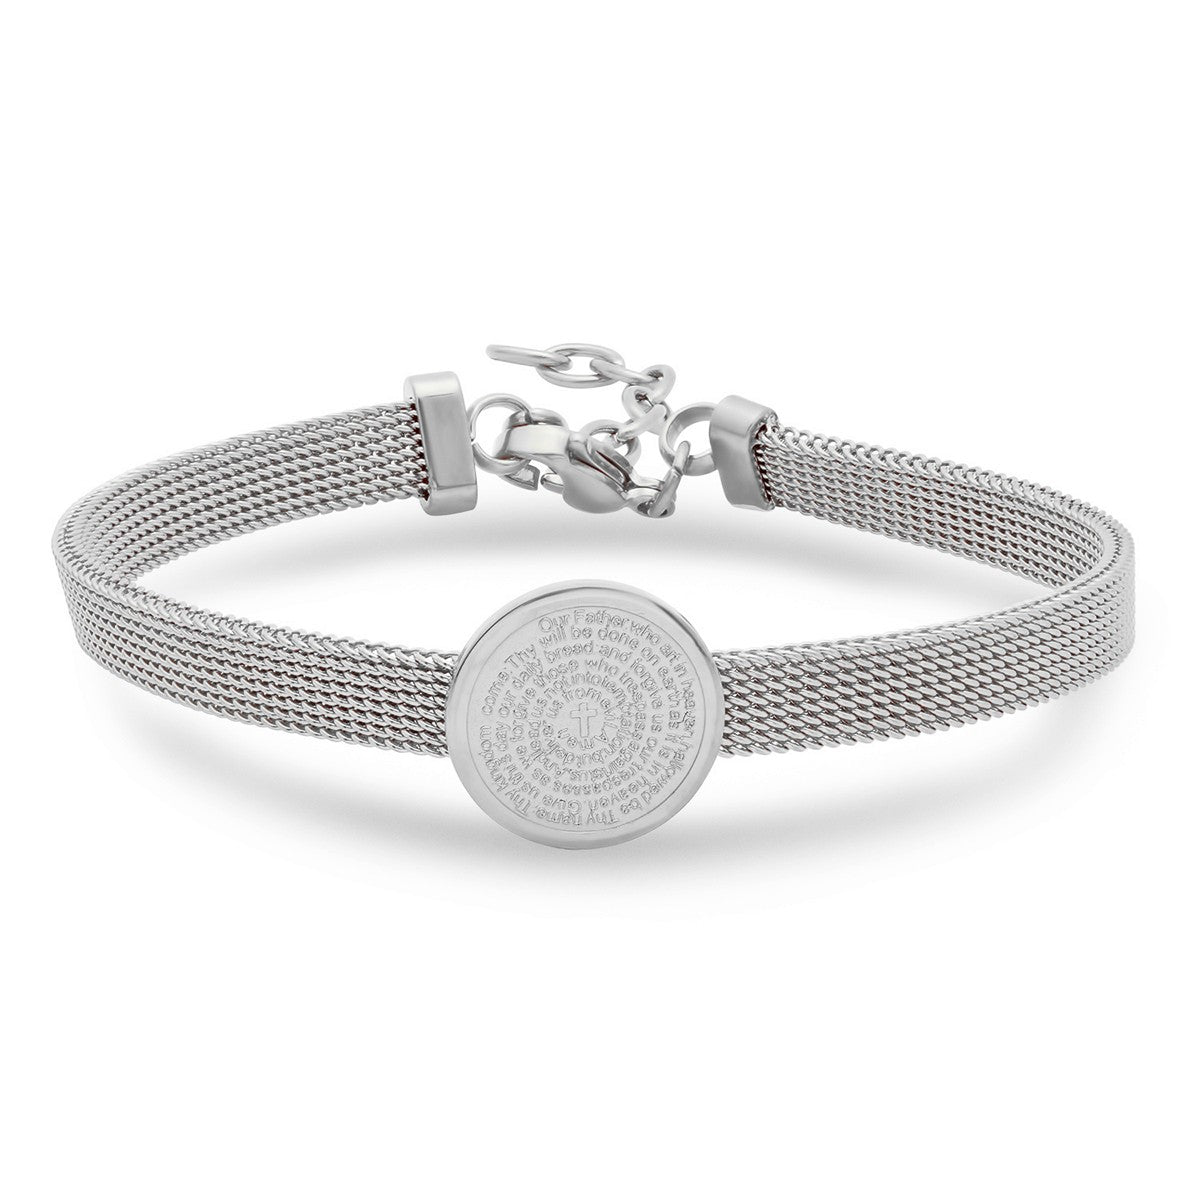 title:SteelTime Women's Stainless Steel Solitaire Charm Our Father Prayer Mesh Bracelet;color:Silver